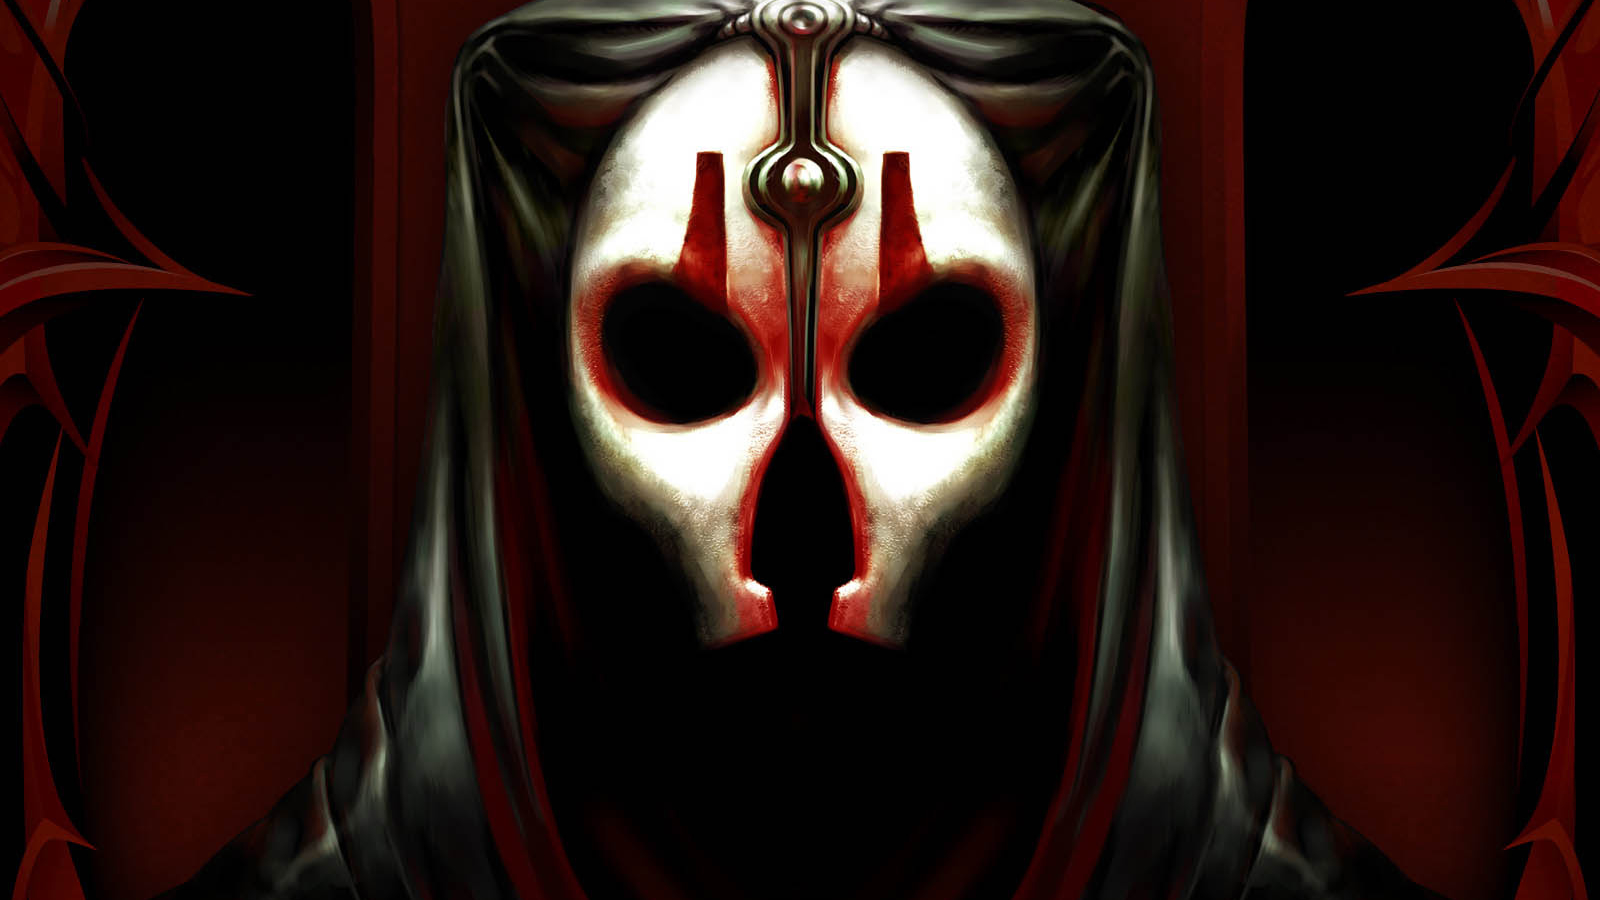 Star Wars Star Wars Knights Of The Old Republic Ii The Sith Lords Darth Nihilus Mask Sith Video Game 1600x900